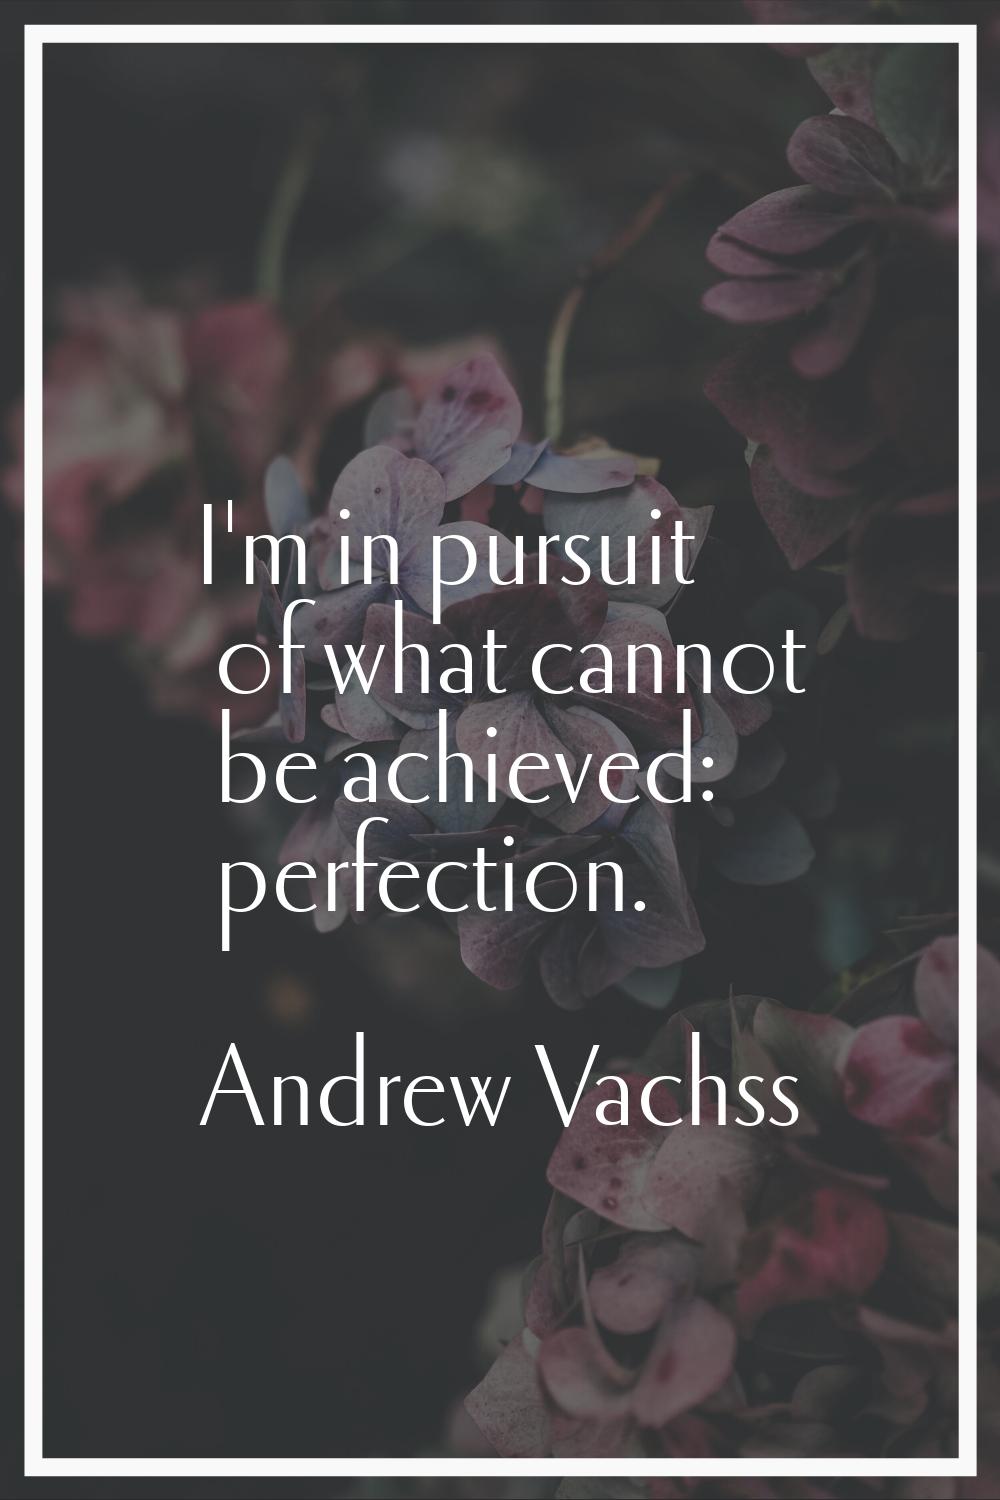 I'm in pursuit of what cannot be achieved: perfection.